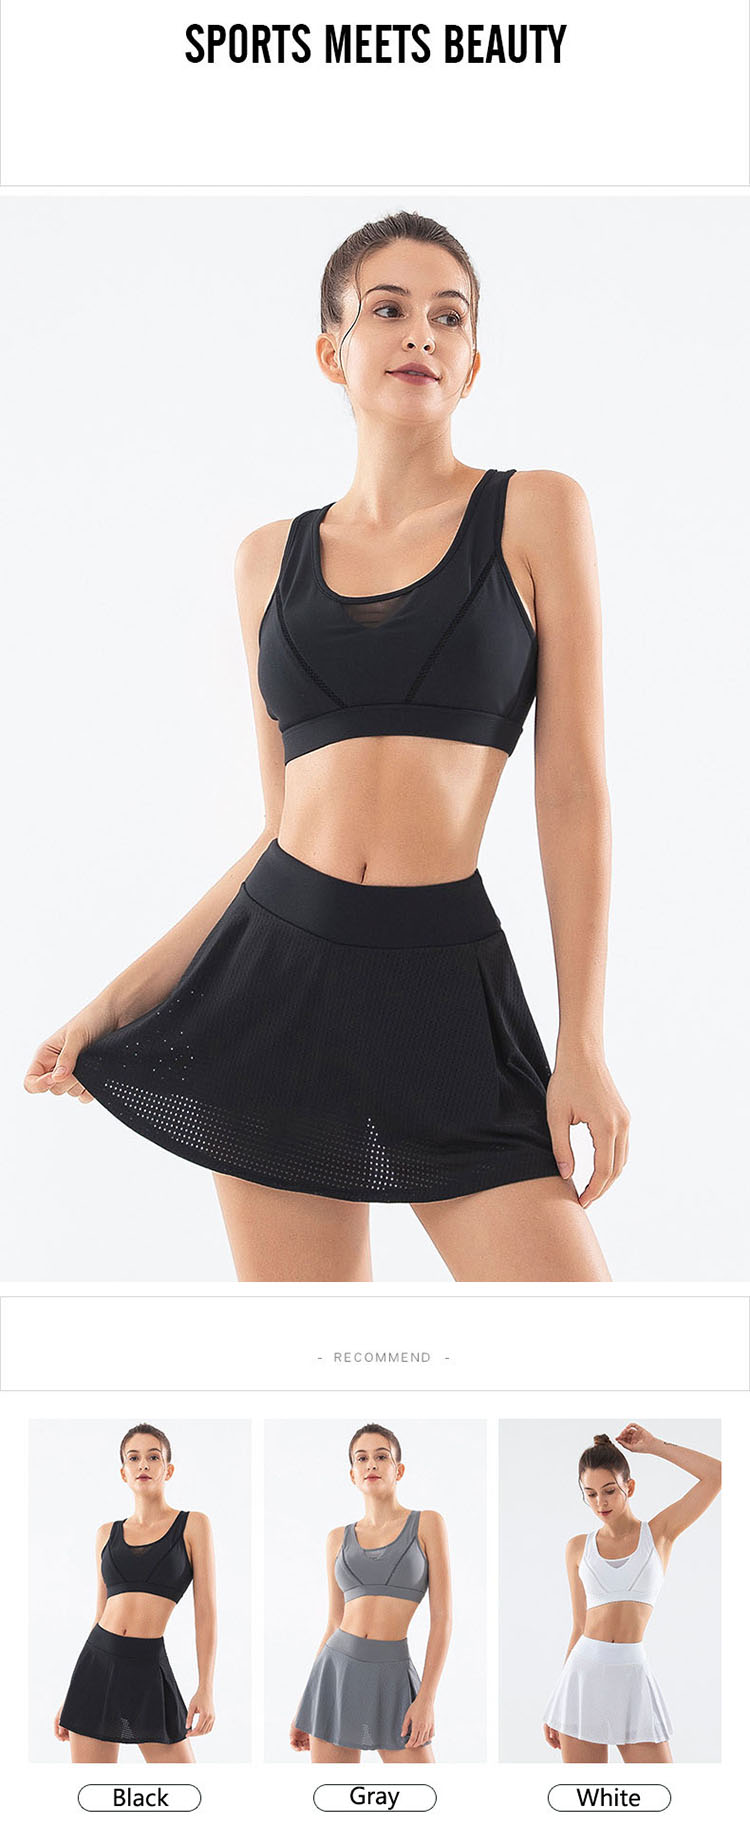 As sports styles continue to influence cropped running leggings